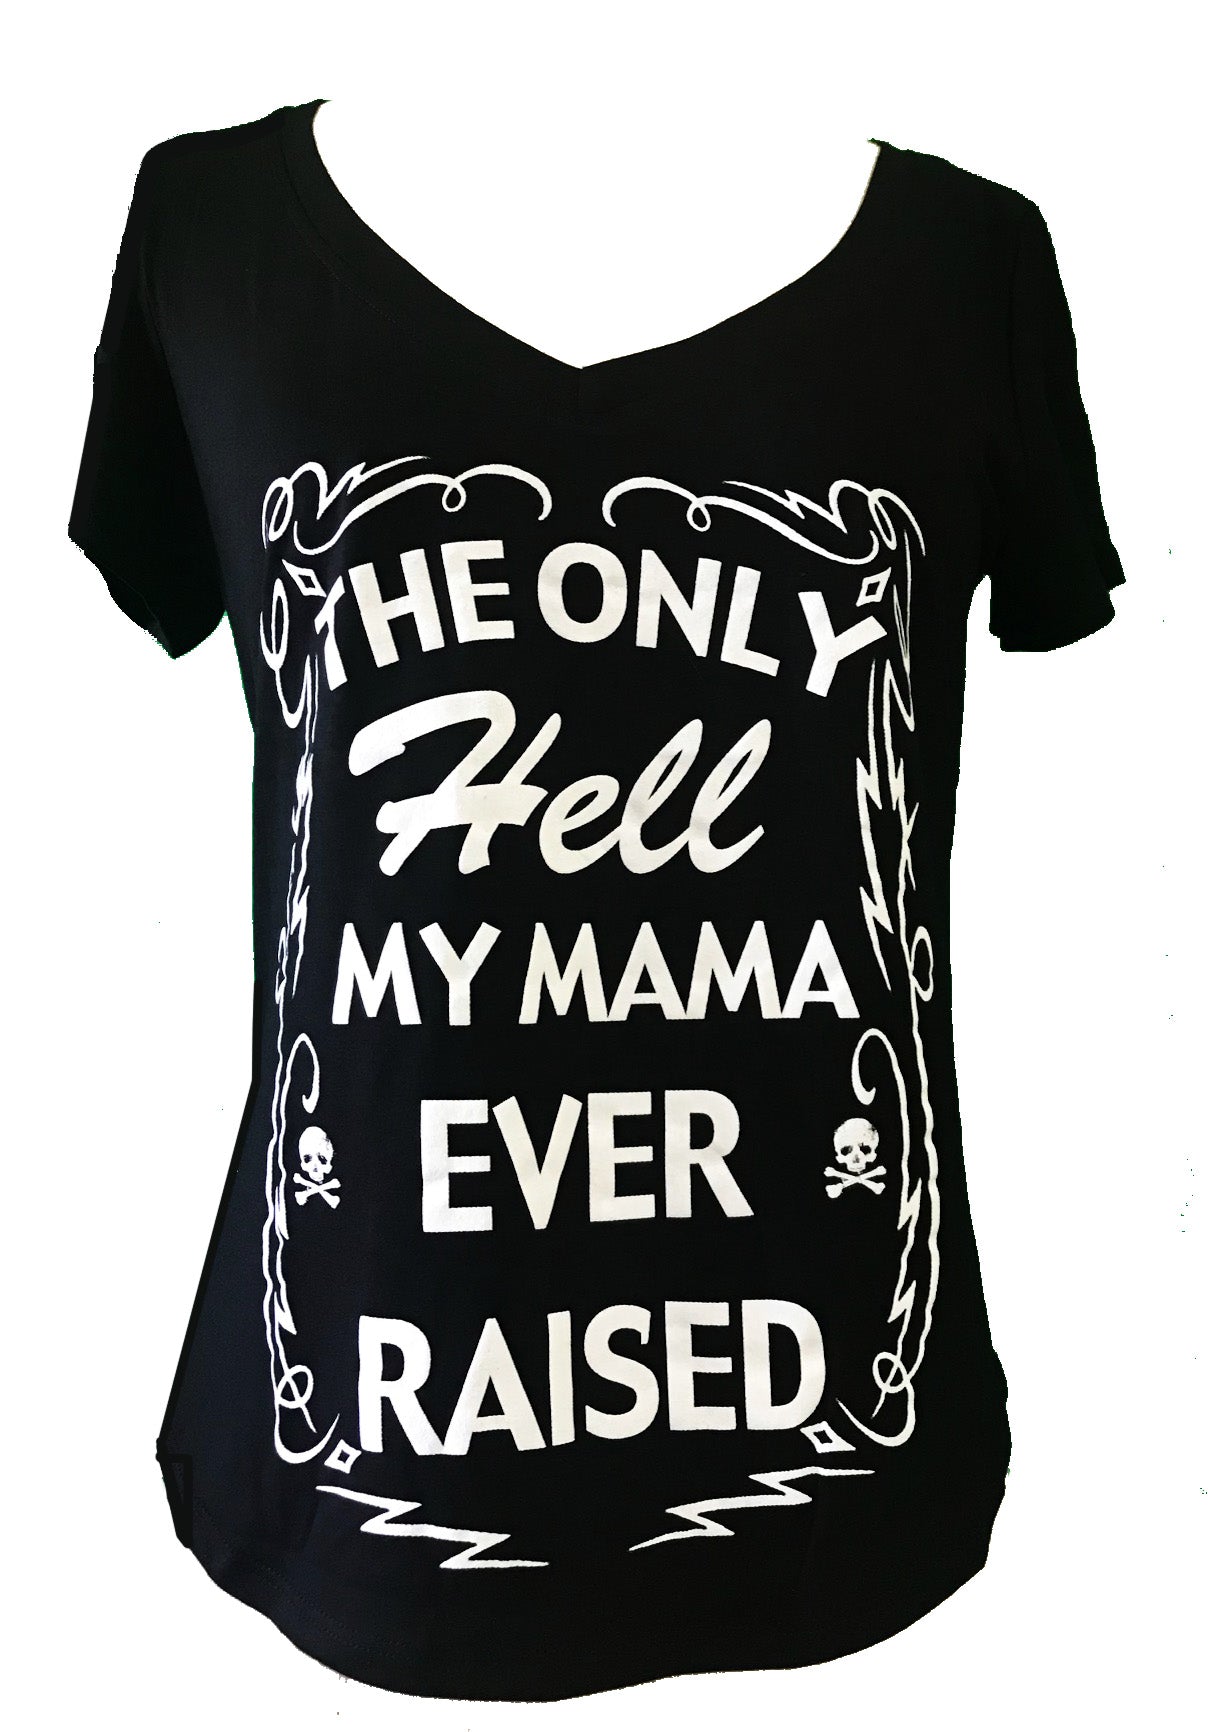 THE ONLY HELL MY MAMA EVER RAISED SHORT SLEEVE V NECK - Trailsclothing.com